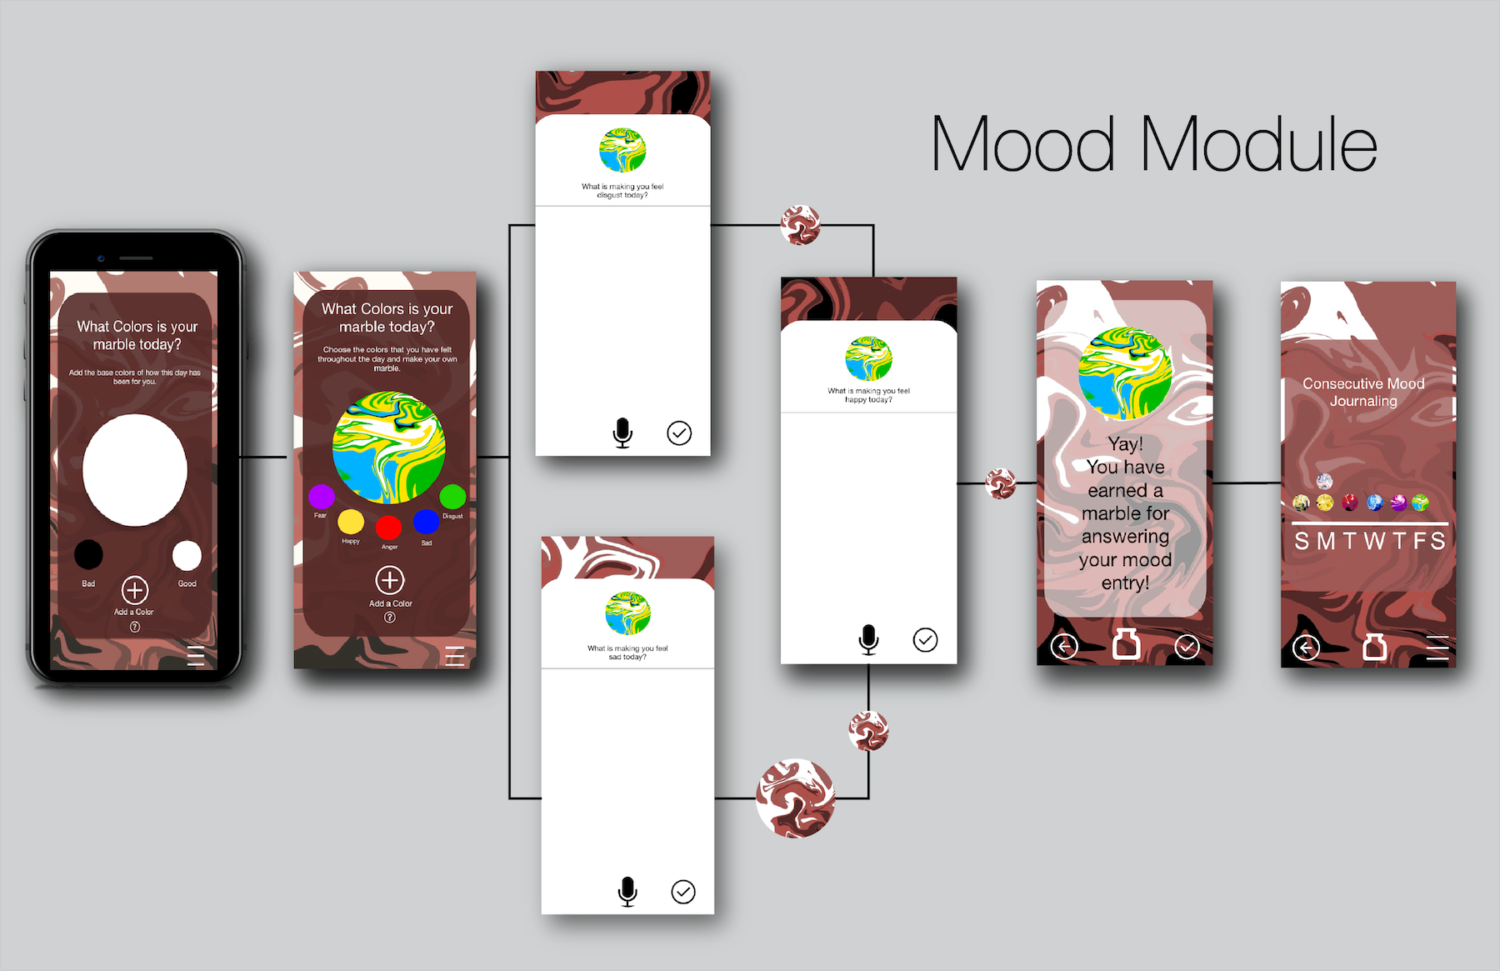 Mood Module Wireframes depict ways users can create marble based on their moods and then diving into a deeper into how they are feeling based on the colors they chose.